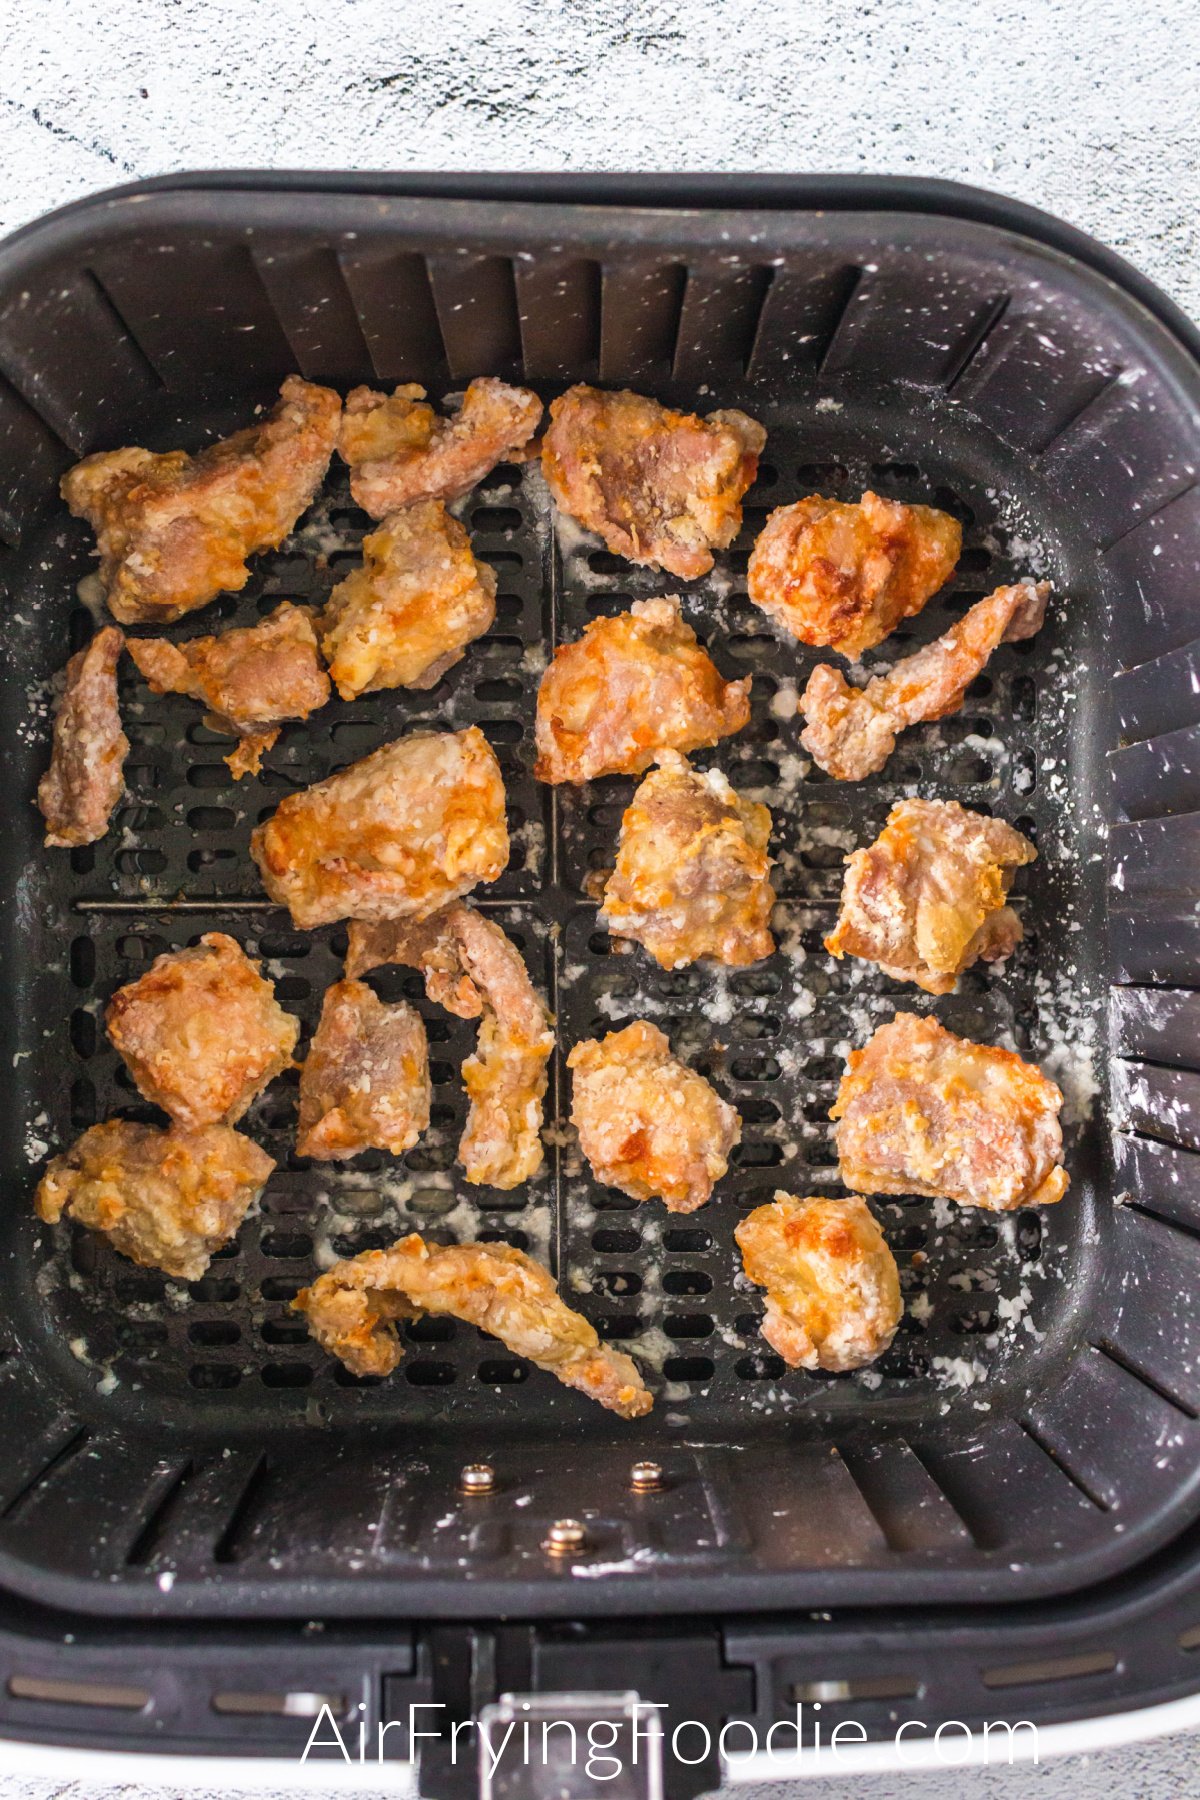 Cooked Sesame Chicken in the basket of the air fryer.